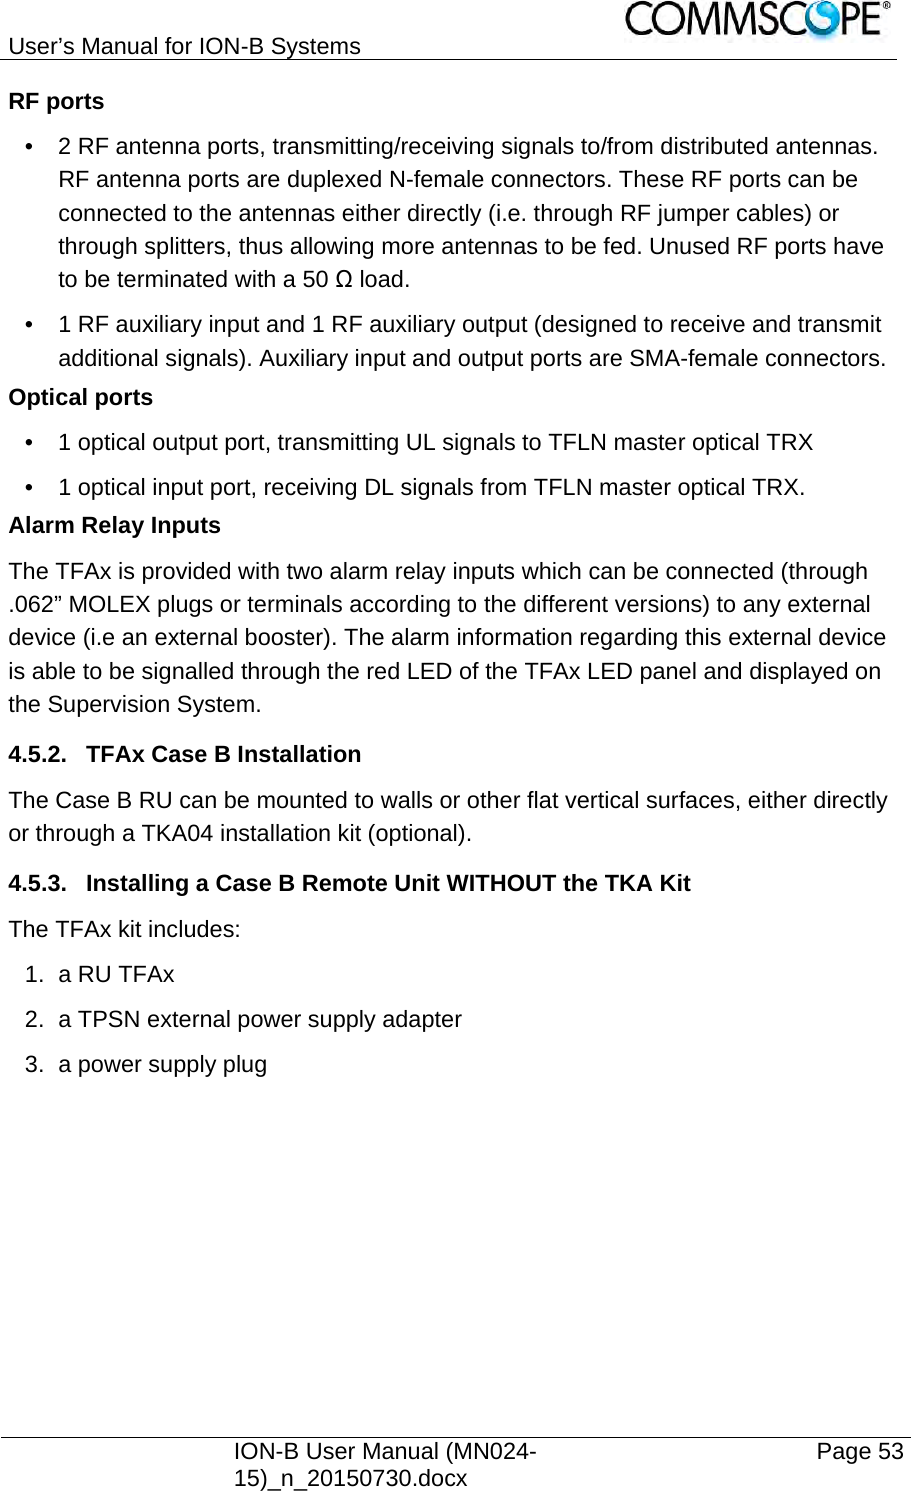 User’s Manual for ION-B Systems    ION-B User Manual (MN024-15)_n_20150730.docx  Page 53 RF ports •  2 RF antenna ports, transmitting/receiving signals to/from distributed antennas. RF antenna ports are duplexed N-female connectors. These RF ports can be connected to the antennas either directly (i.e. through RF jumper cables) or through splitters, thus allowing more antennas to be fed. Unused RF ports have to be terminated with a 50 Ω load. •  1 RF auxiliary input and 1 RF auxiliary output (designed to receive and transmit additional signals). Auxiliary input and output ports are SMA-female connectors. Optical ports •  1 optical output port, transmitting UL signals to TFLN master optical TRX •  1 optical input port, receiving DL signals from TFLN master optical TRX. Alarm Relay Inputs The TFAx is provided with two alarm relay inputs which can be connected (through .062” MOLEX plugs or terminals according to the different versions) to any external device (i.e an external booster). The alarm information regarding this external device is able to be signalled through the red LED of the TFAx LED panel and displayed on the Supervision System. 4.5.2.  TFAx Case B Installation The Case B RU can be mounted to walls or other flat vertical surfaces, either directly or through a TKA04 installation kit (optional). 4.5.3.  Installing a Case B Remote Unit WITHOUT the TKA Kit The TFAx kit includes: 1. a RU TFAx  2.  a TPSN external power supply adapter 3.  a power supply plug    